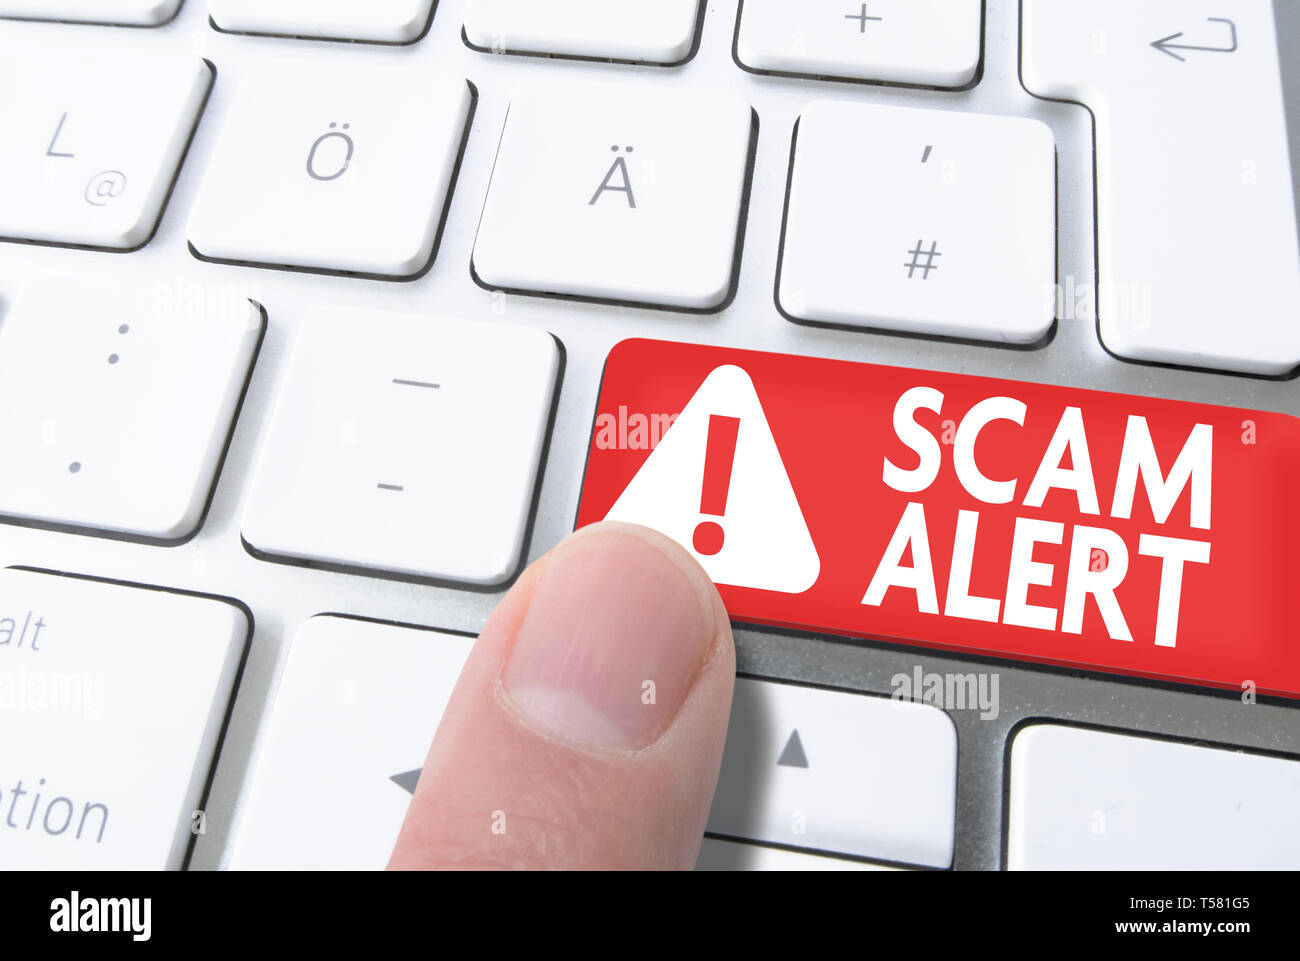 close-up of finger pressing red key labeled SCAM ALERT on computer keyboard Stock Photo